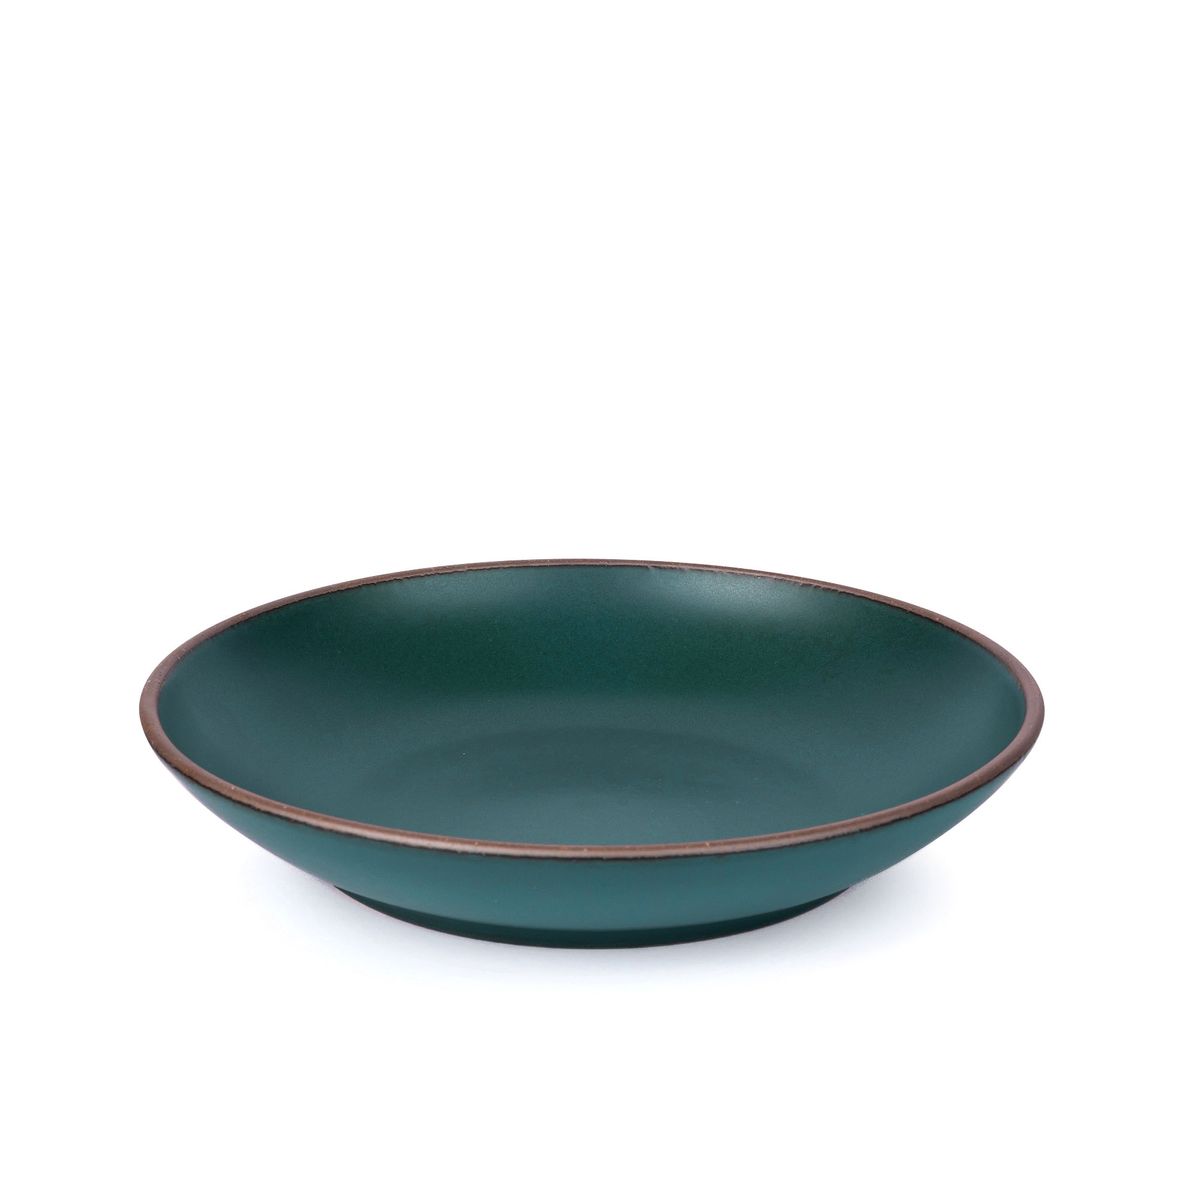 A large ceramic plate with a curved bowl edge in a deep, dark teal color featuring iron speckles and an unglazed rim.